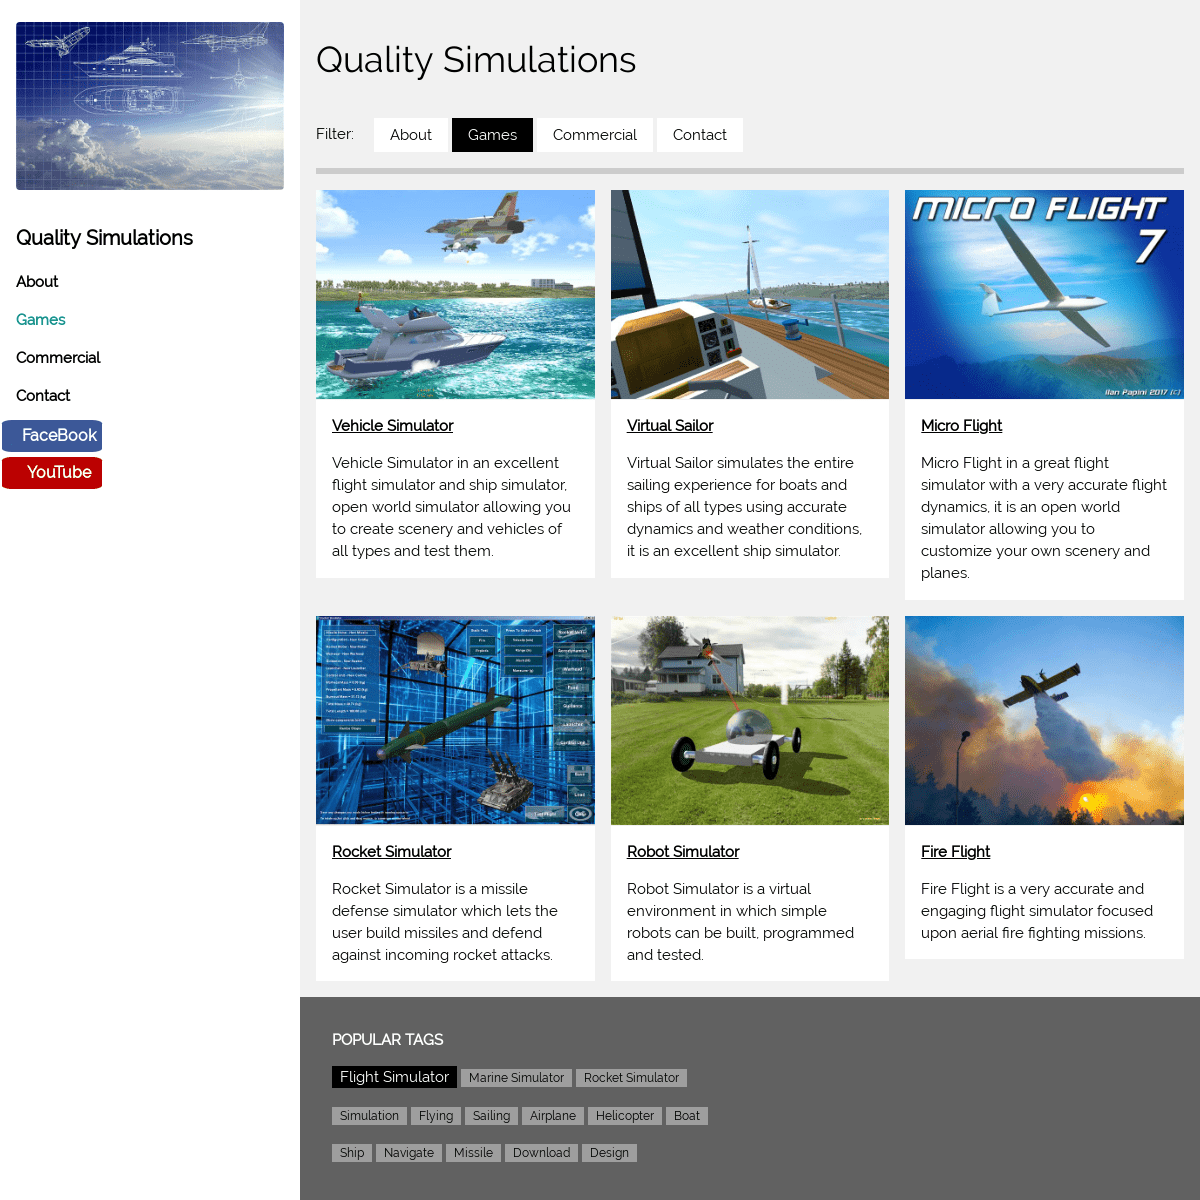 Quality Simulations - great simulations for flight, sailing, robots, rockets and vehicles.